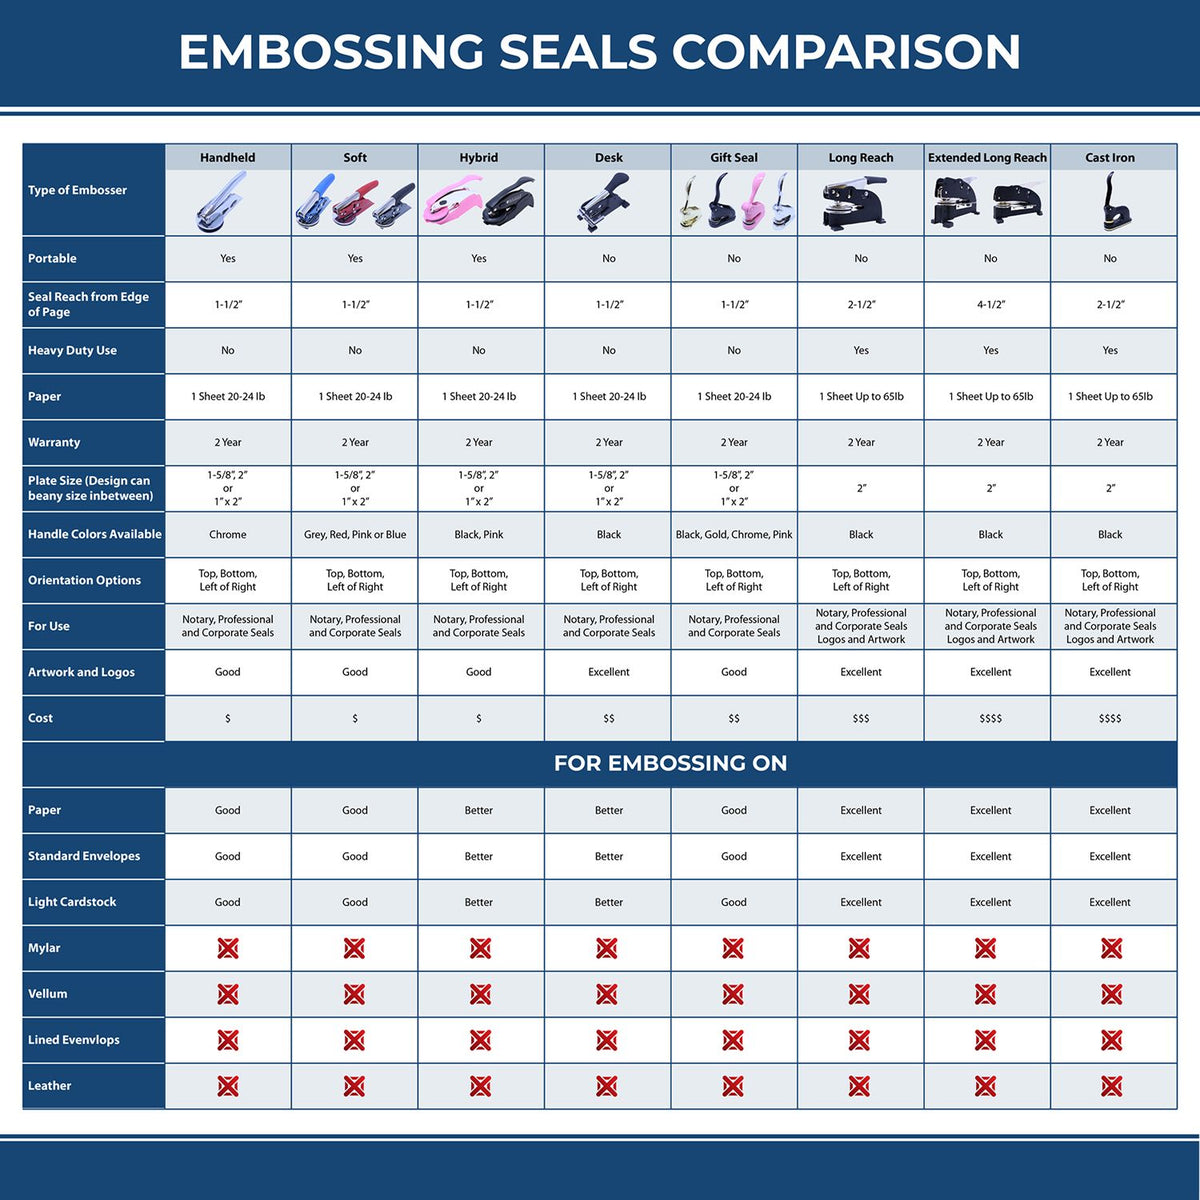 A comparison chart for the different types of mount models available for the Long Reach Hawaii Geology Seal